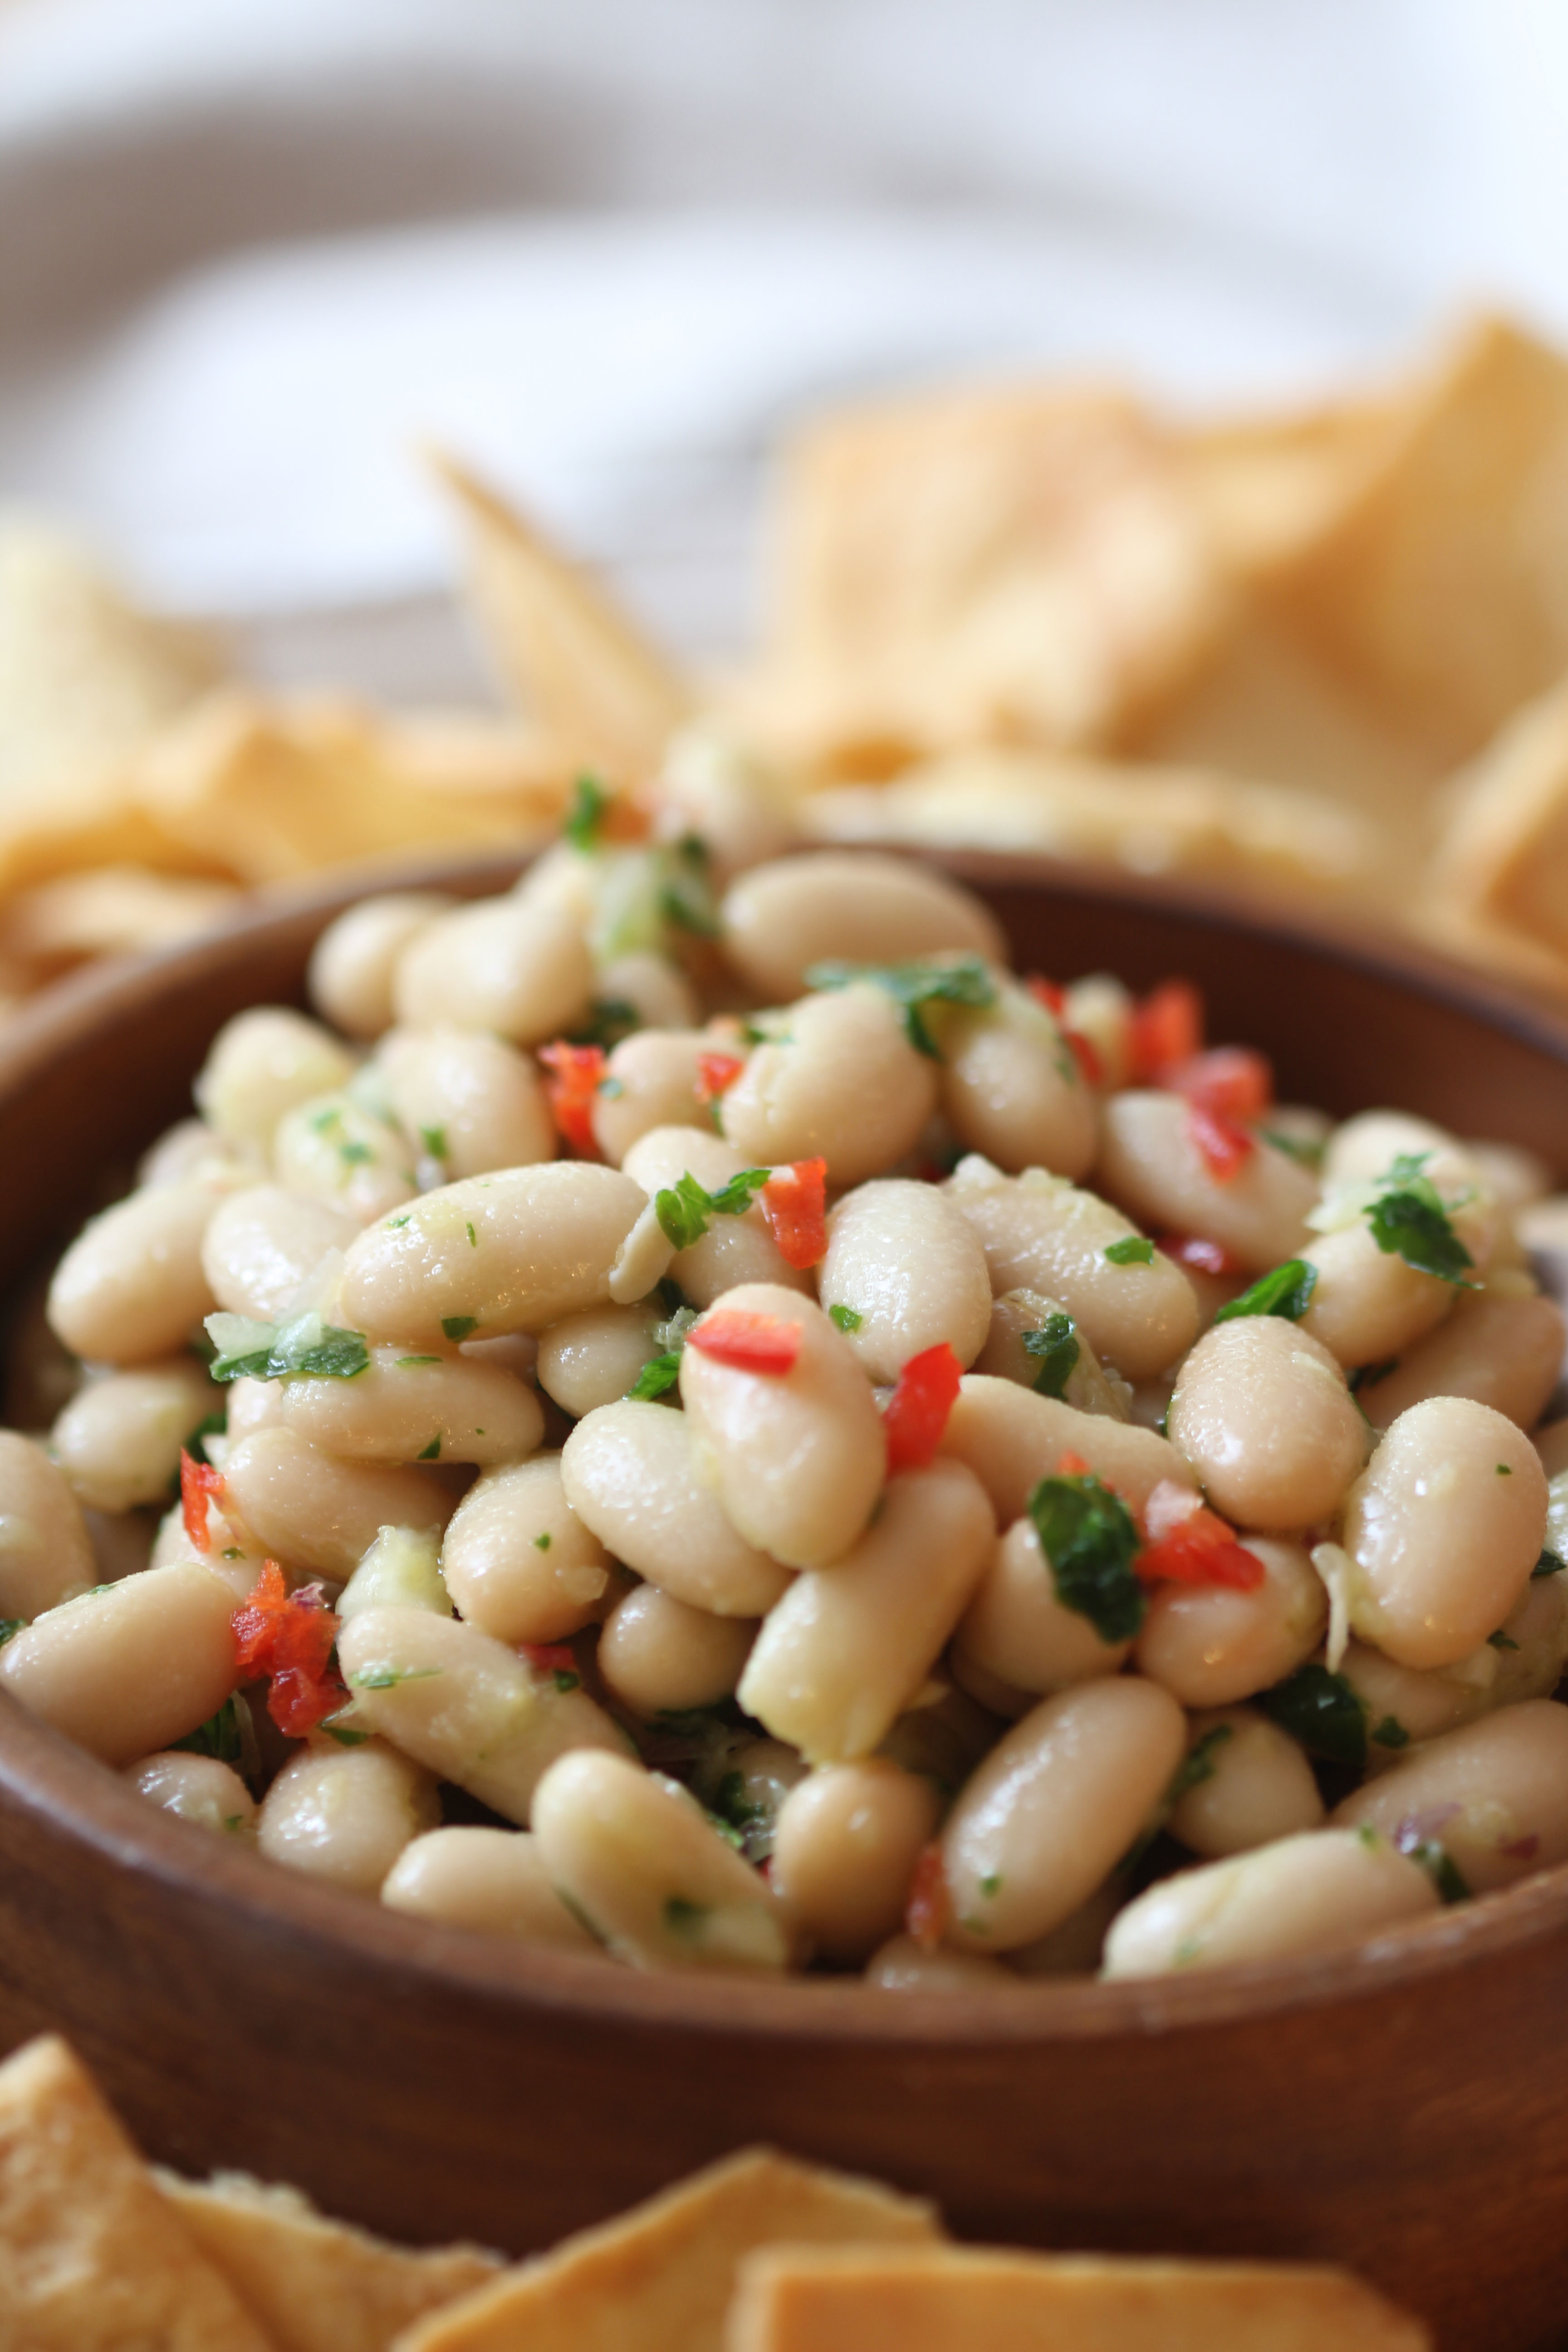 Looking for a healthy and delicious appetizer? Ridgely Brode re-created this white bean appetizer to rave reviews - it is easy and make-ahead!